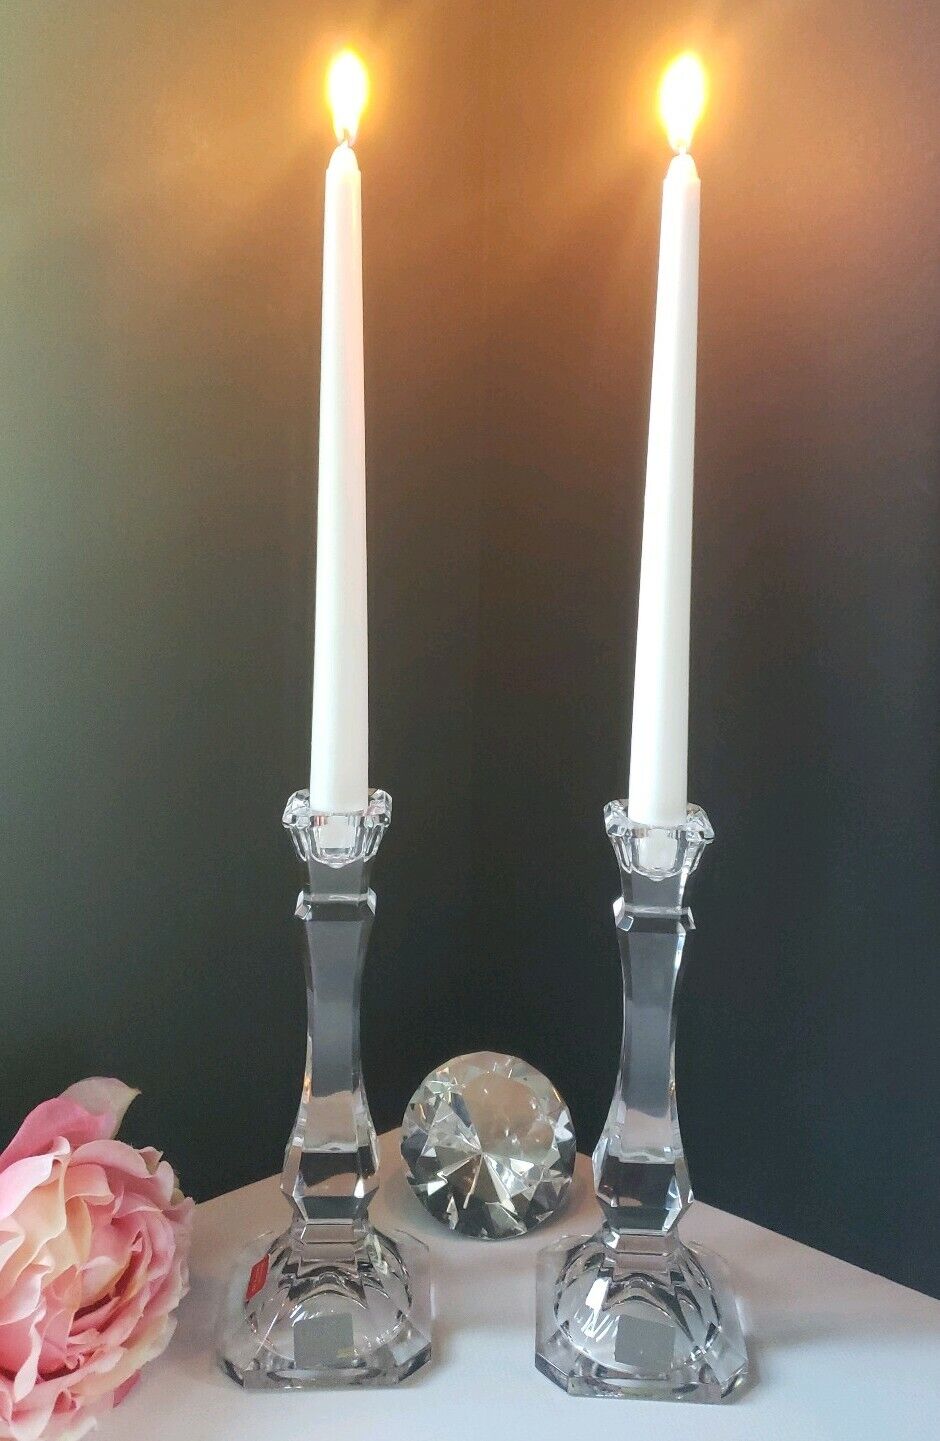 Mikasa - Pair of Lead Crystal Candle Holders  Made in Austria - NEW/DISPLAY ITEM Mikasa